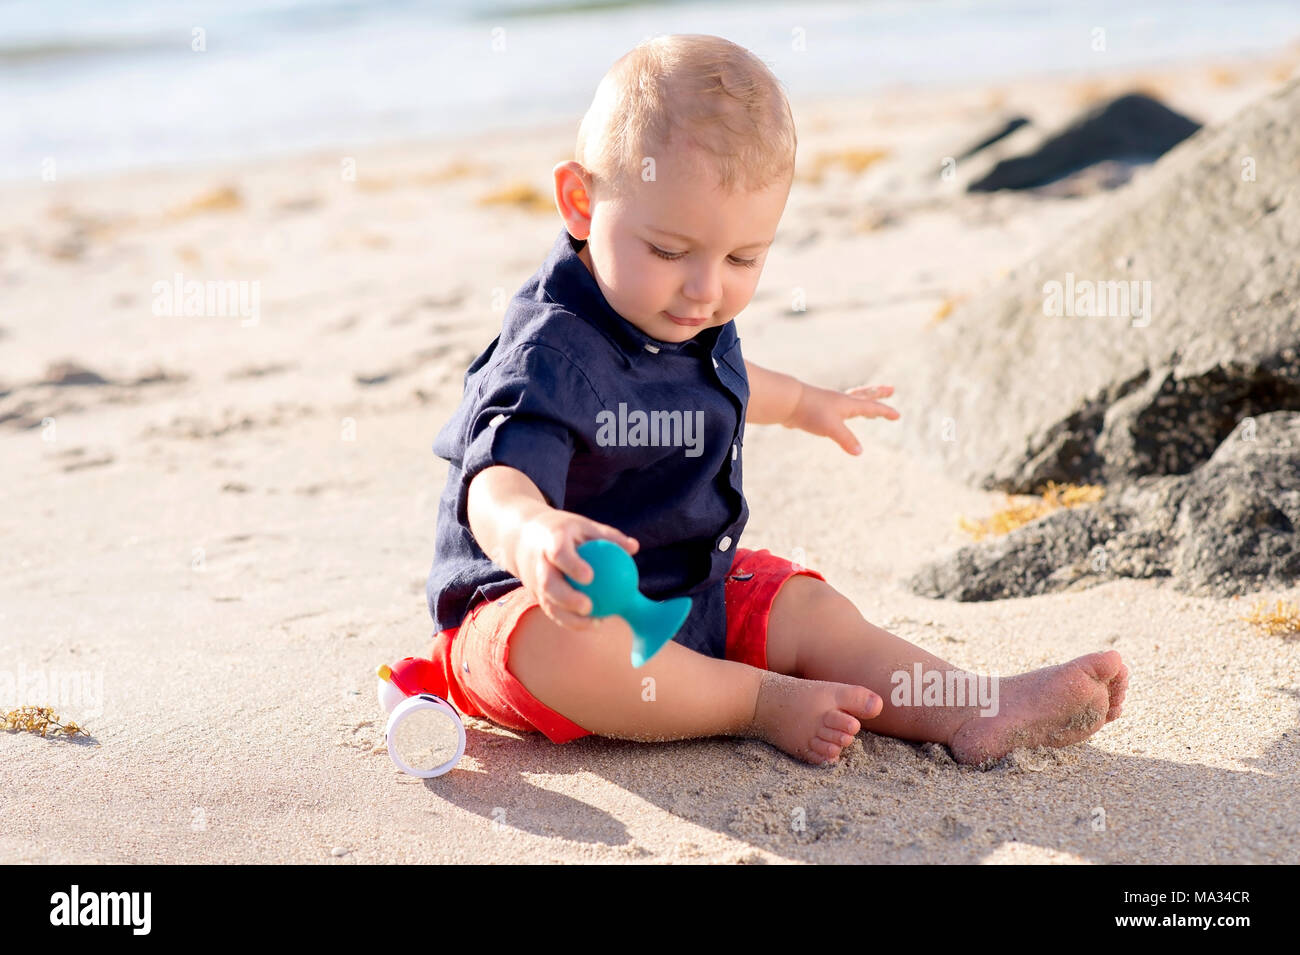 A one year old baby boy sitting on a beach and playing with a toy. Stock Photo